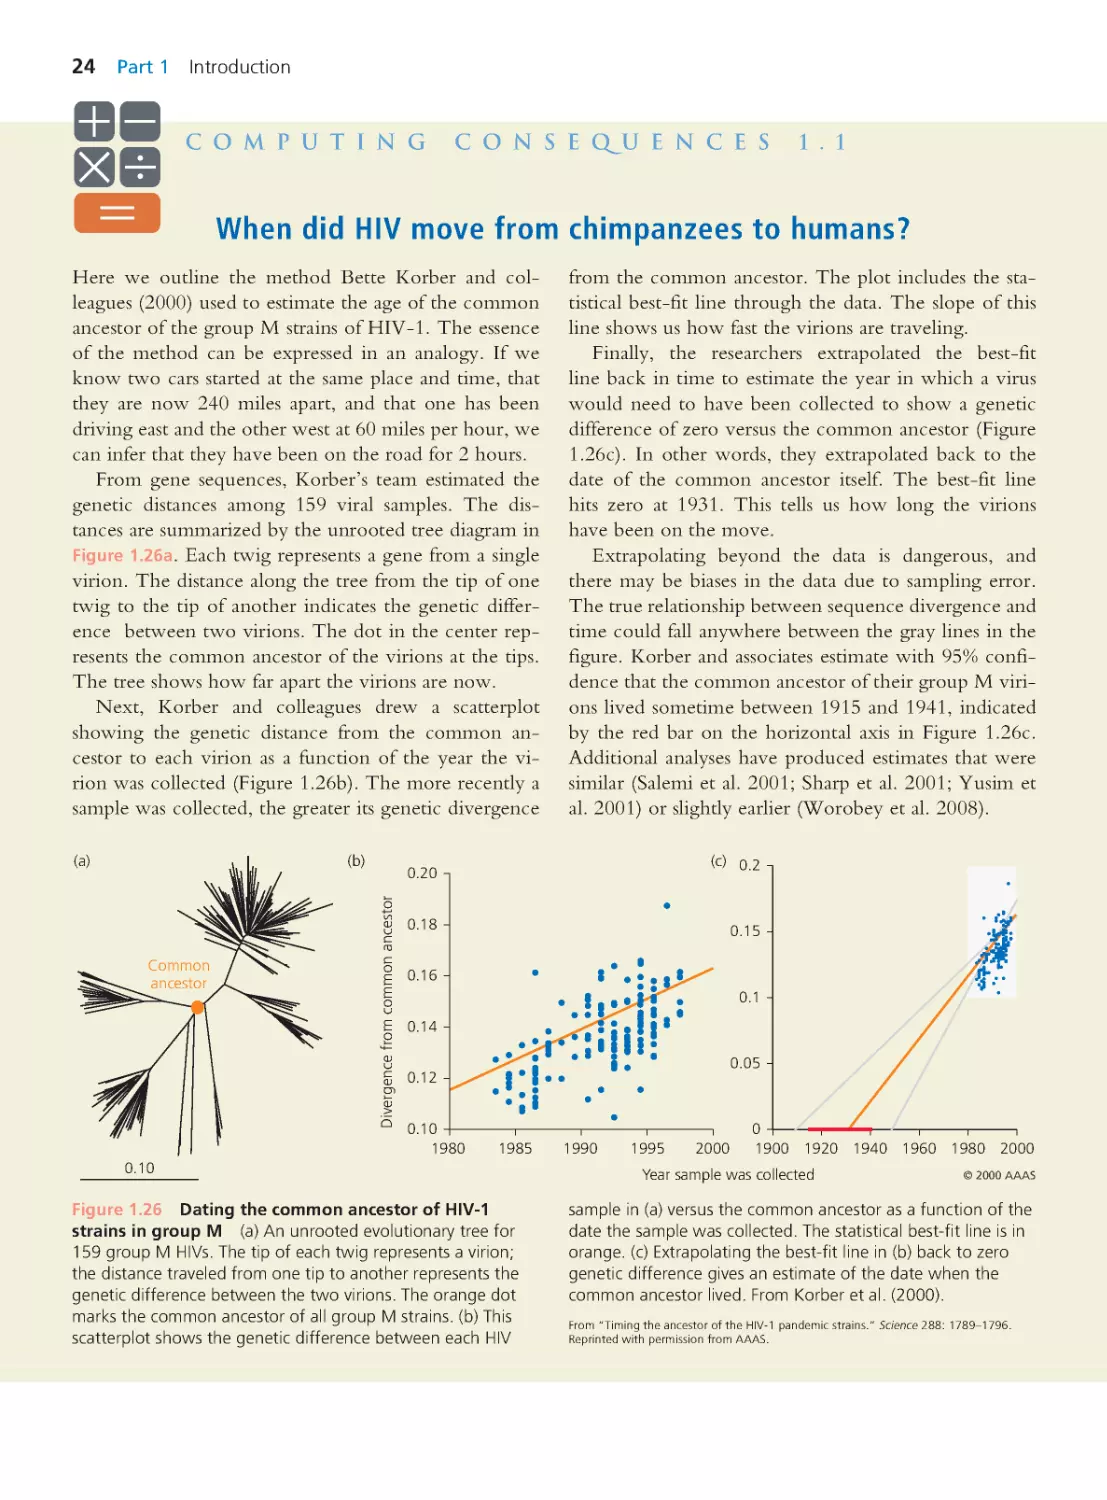 Computing Consequences 1.1 When did HIV move from chimpanzees to humans?